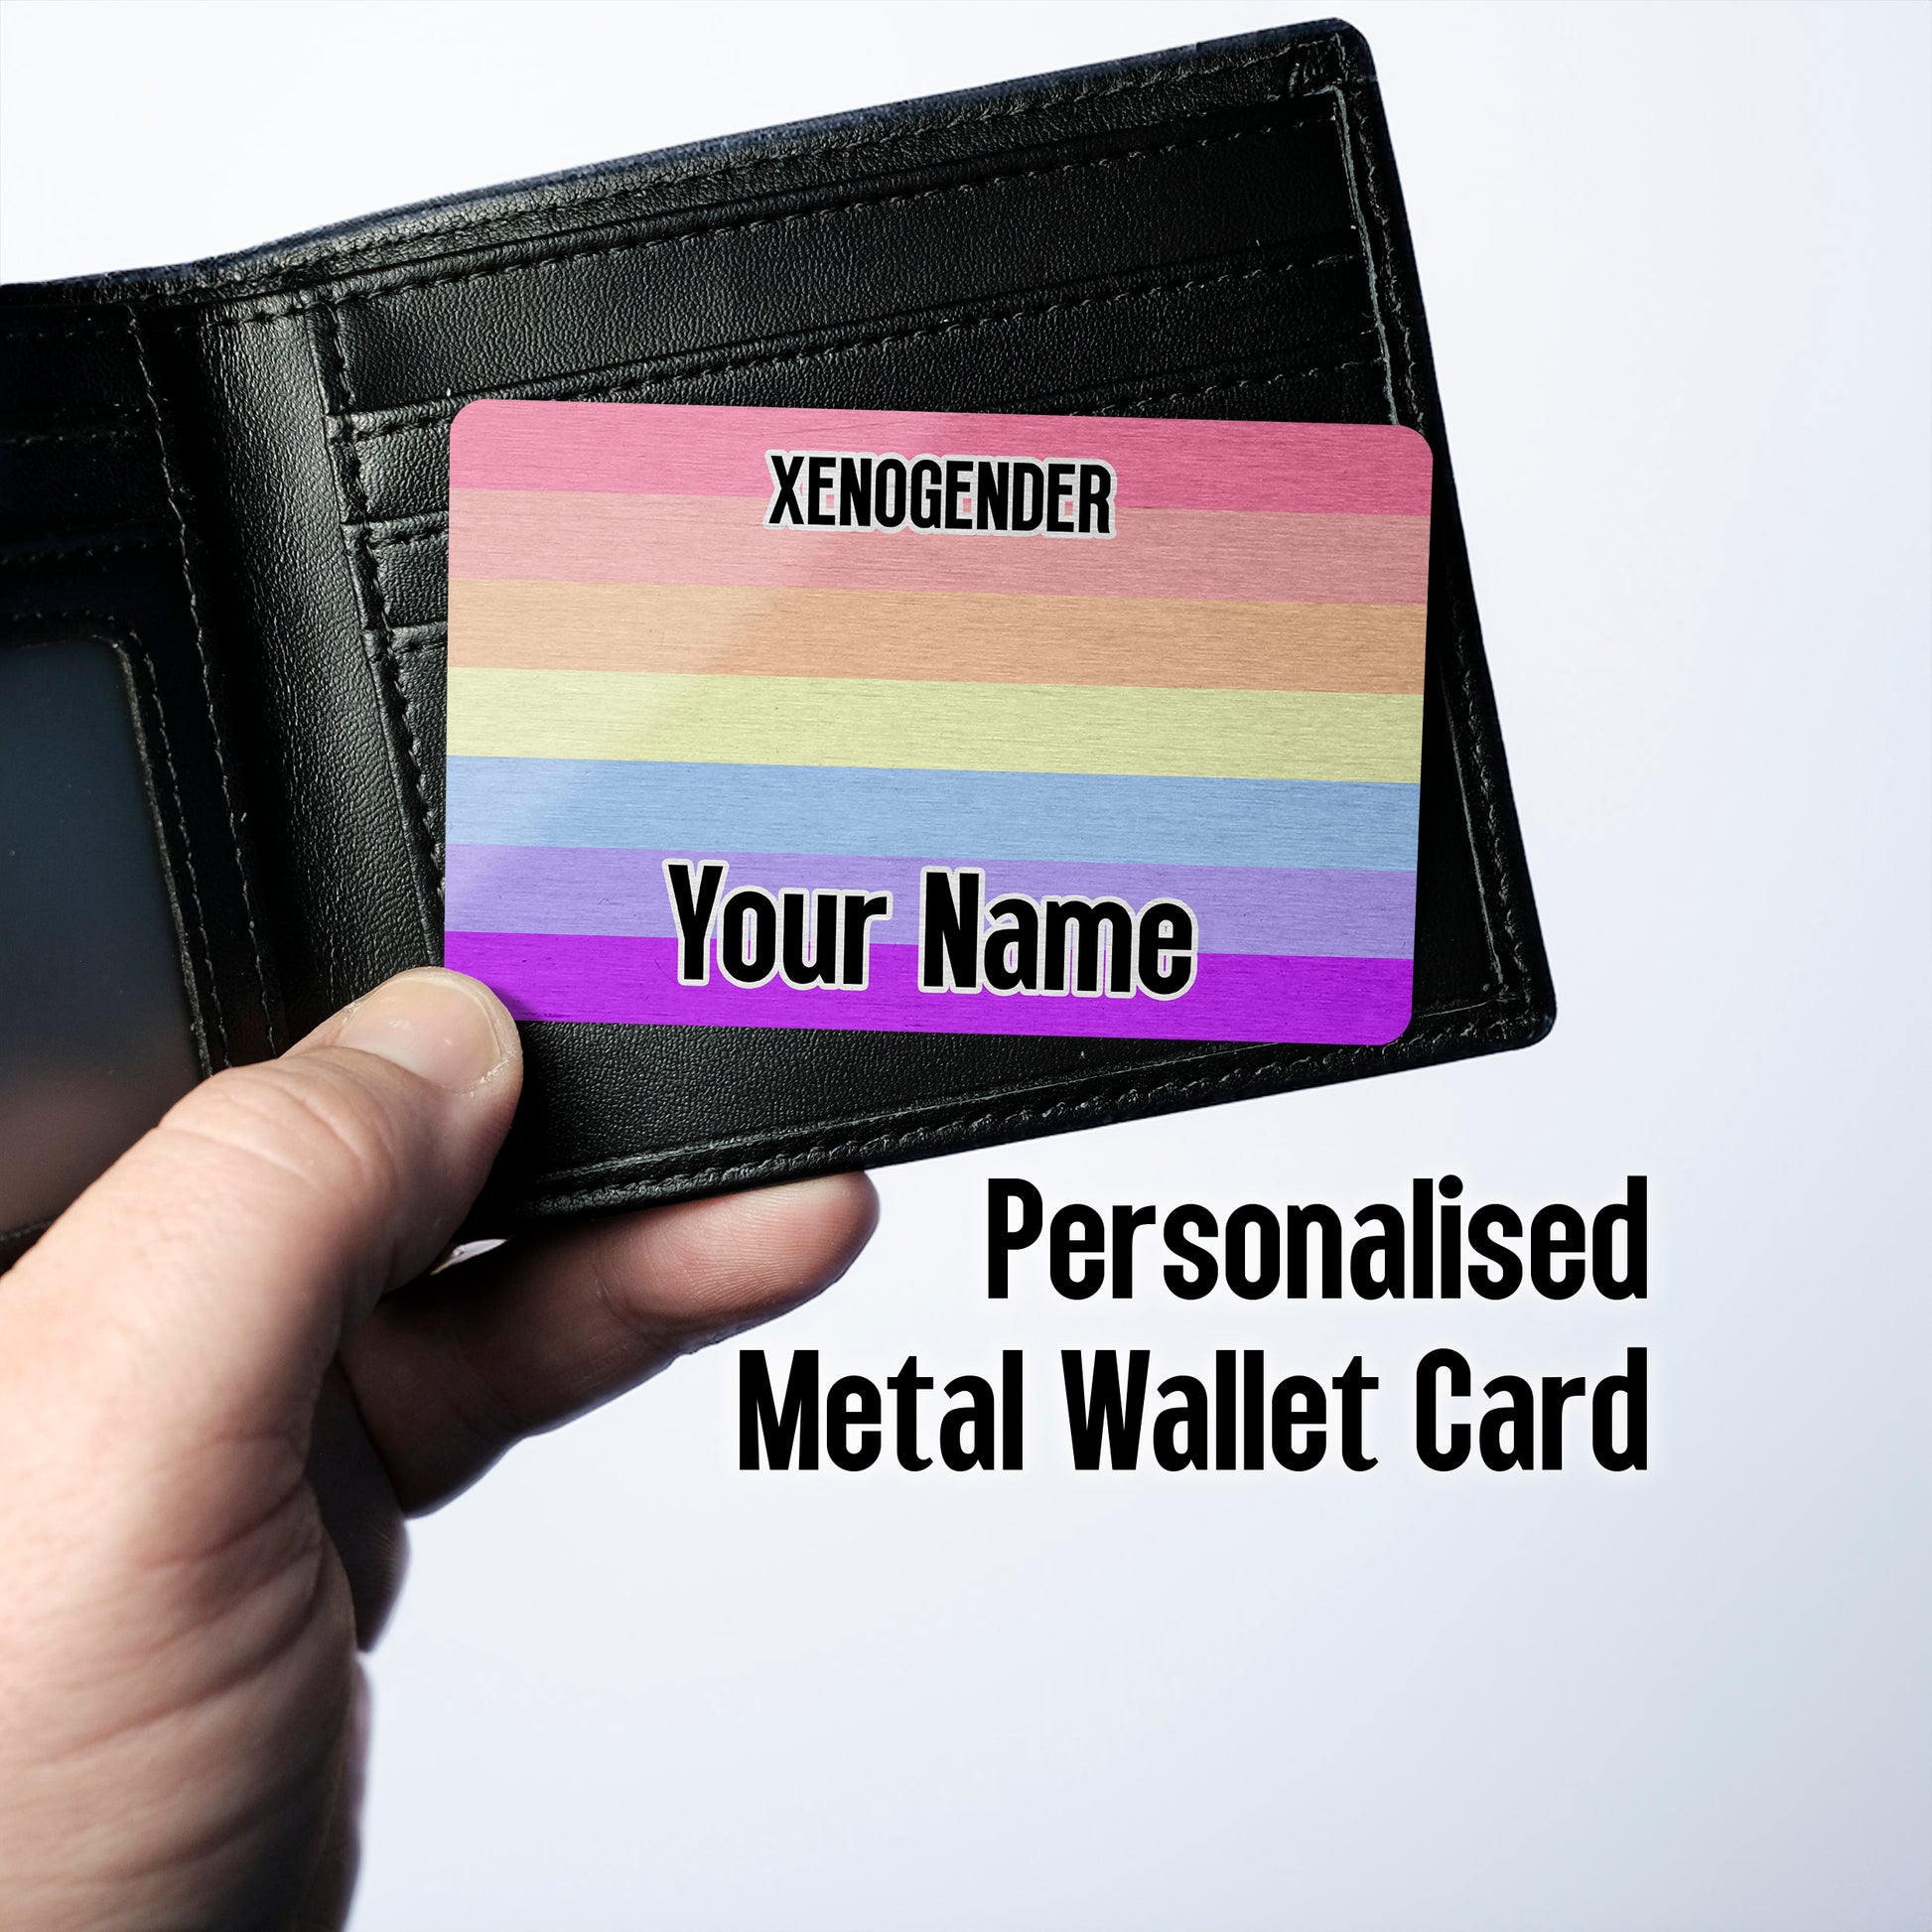 Aluminium wallet card personalised with your name and the xenogender pride flag